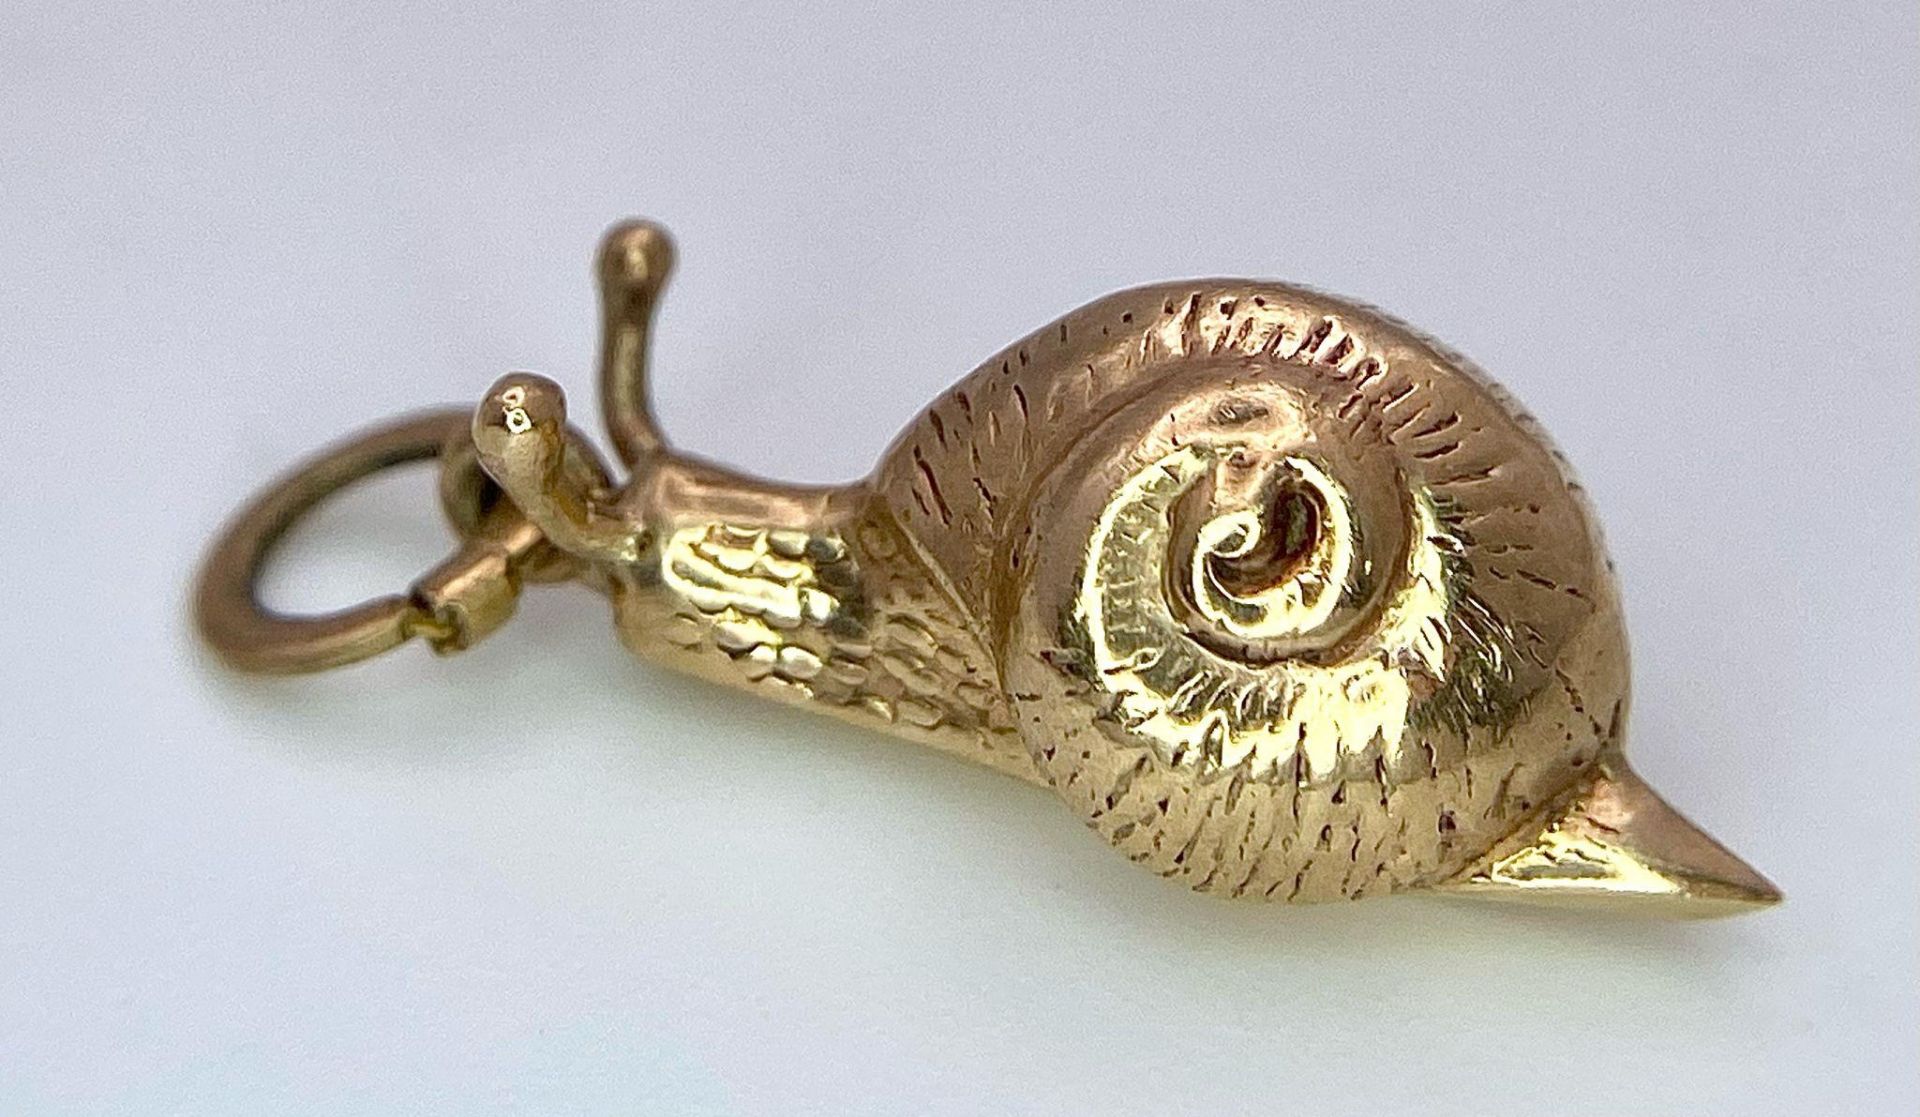 A 9K YELLOW GOLD SNAIL CHARM. TOTAL WEIGHT 0.8G - Image 2 of 4